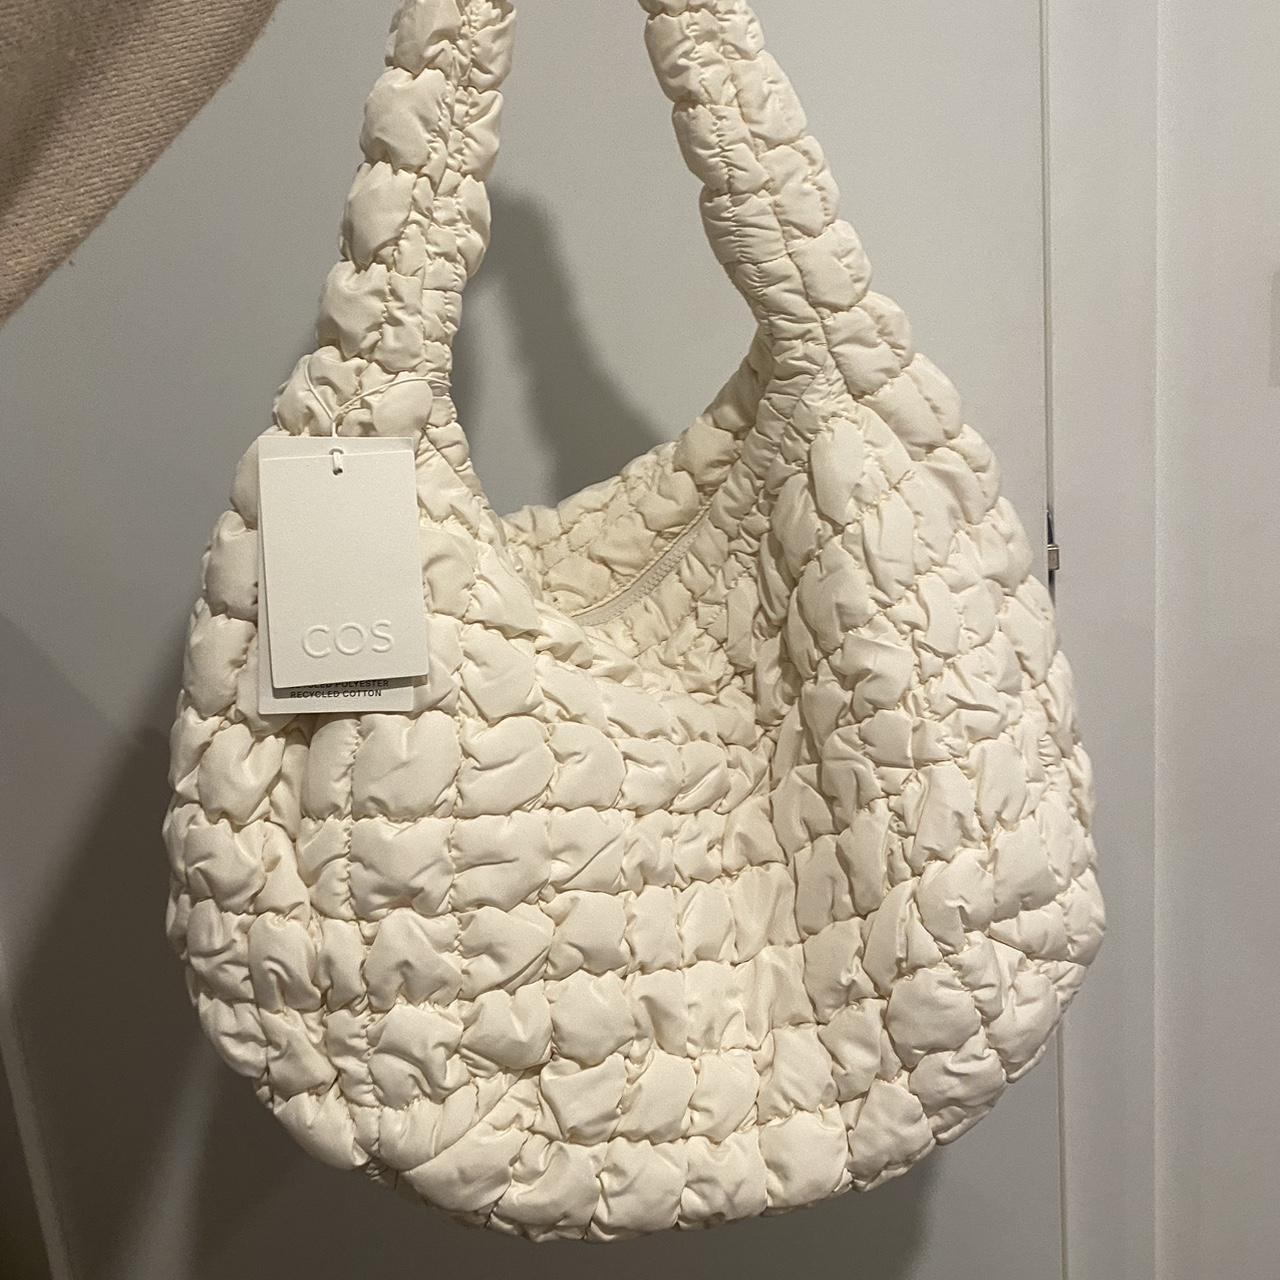 COS quilted bag oversized in white ☁️ Brand new with... - Depop